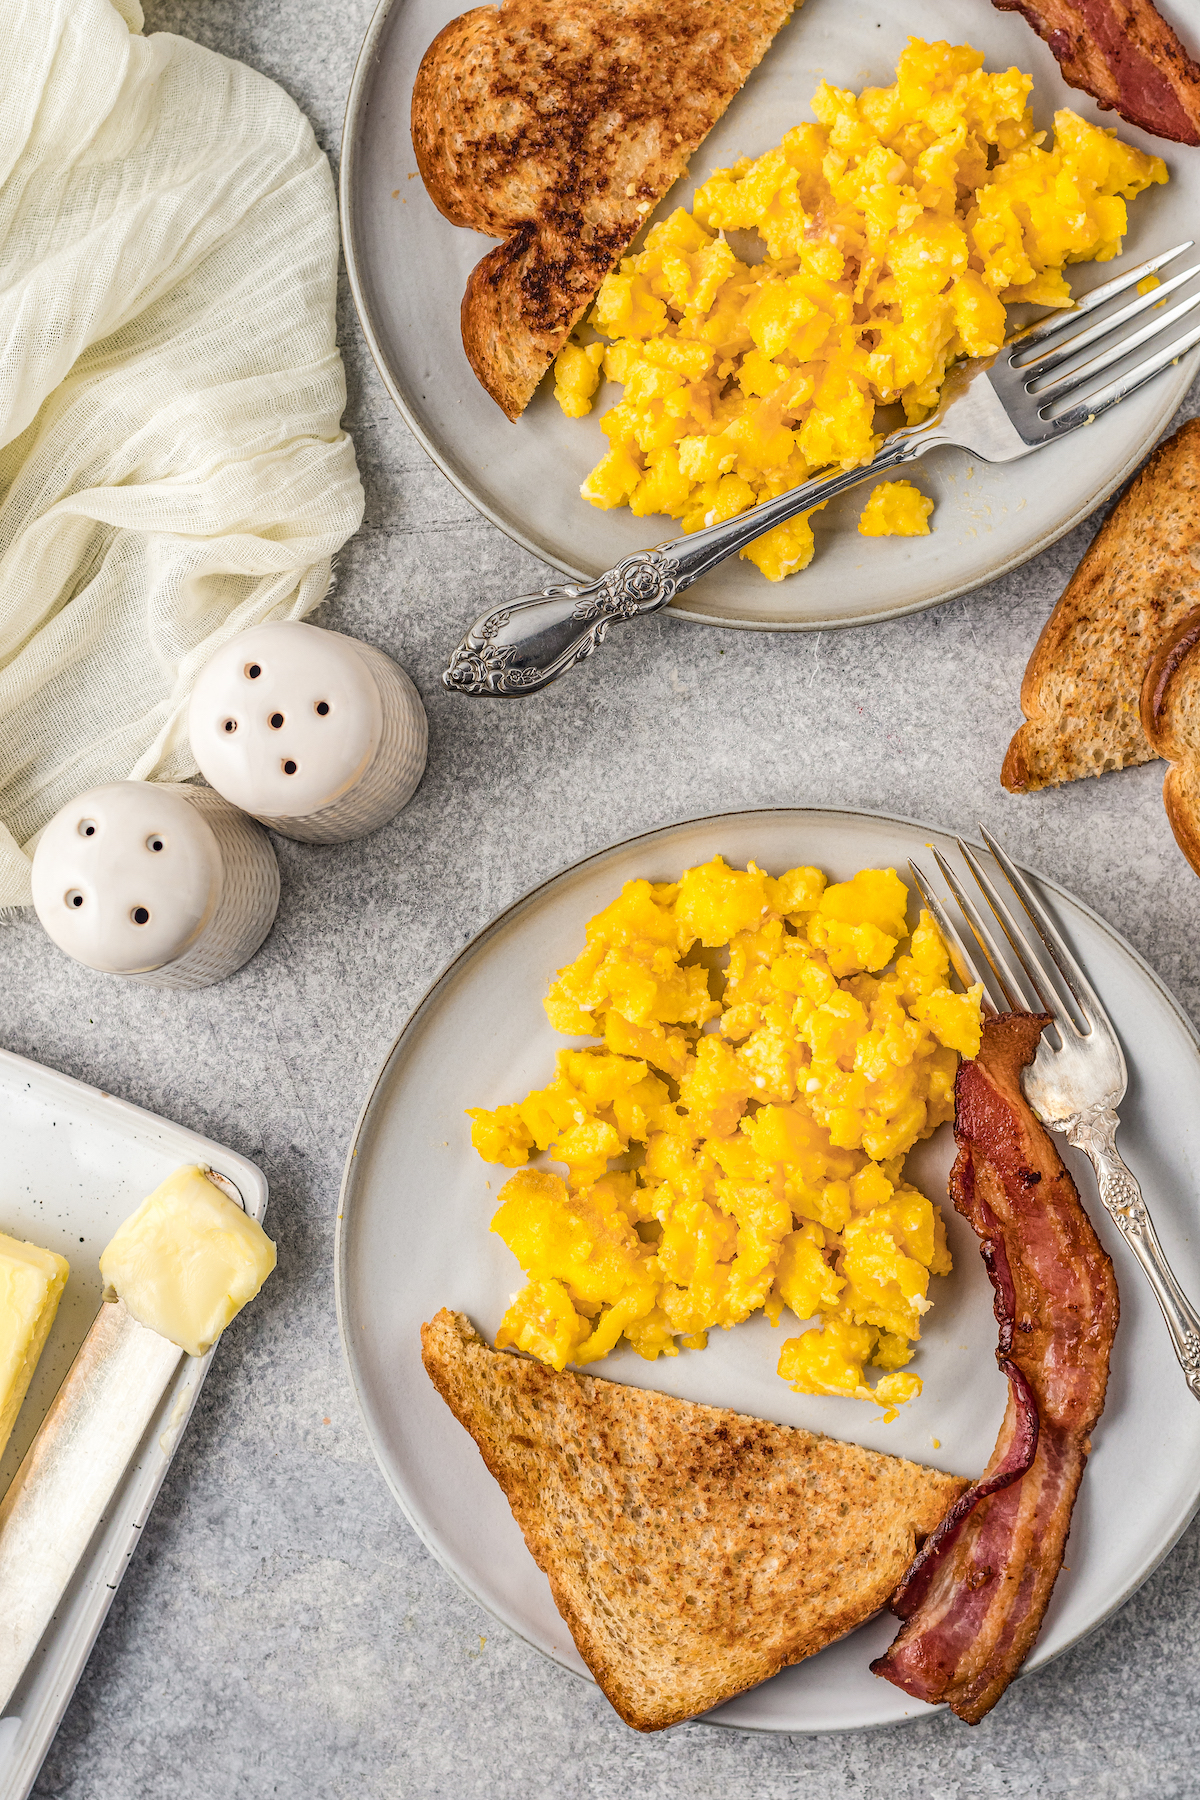 A breakfast spread of air fryer scrambled eggs on plates, next to toast and bacon.